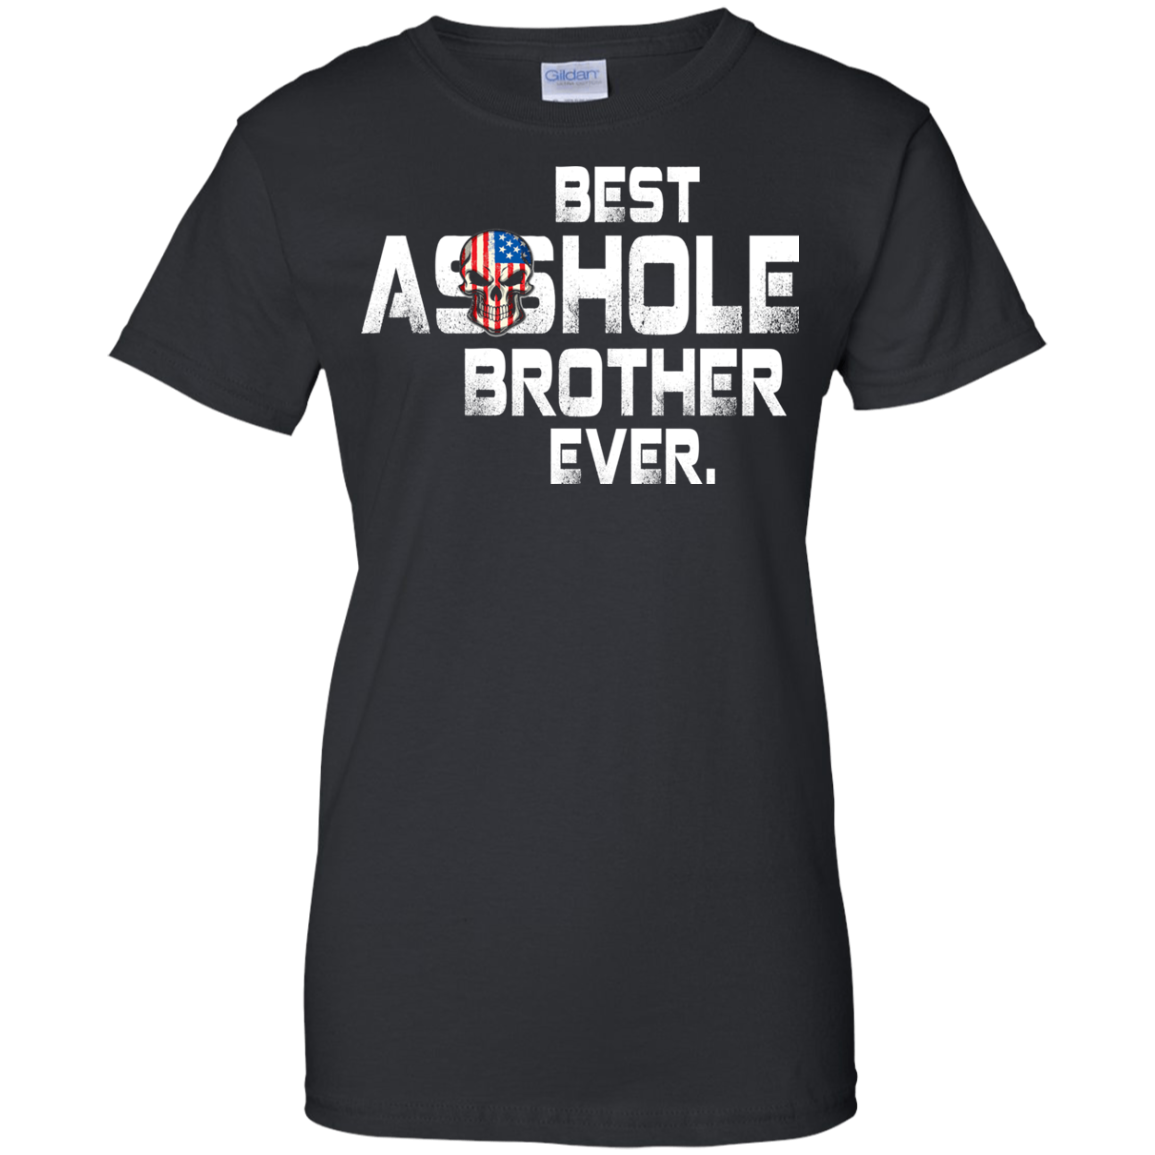 Best Asshole Brother Ever T Shirt Hoodie Tank Ifrogtees 6110